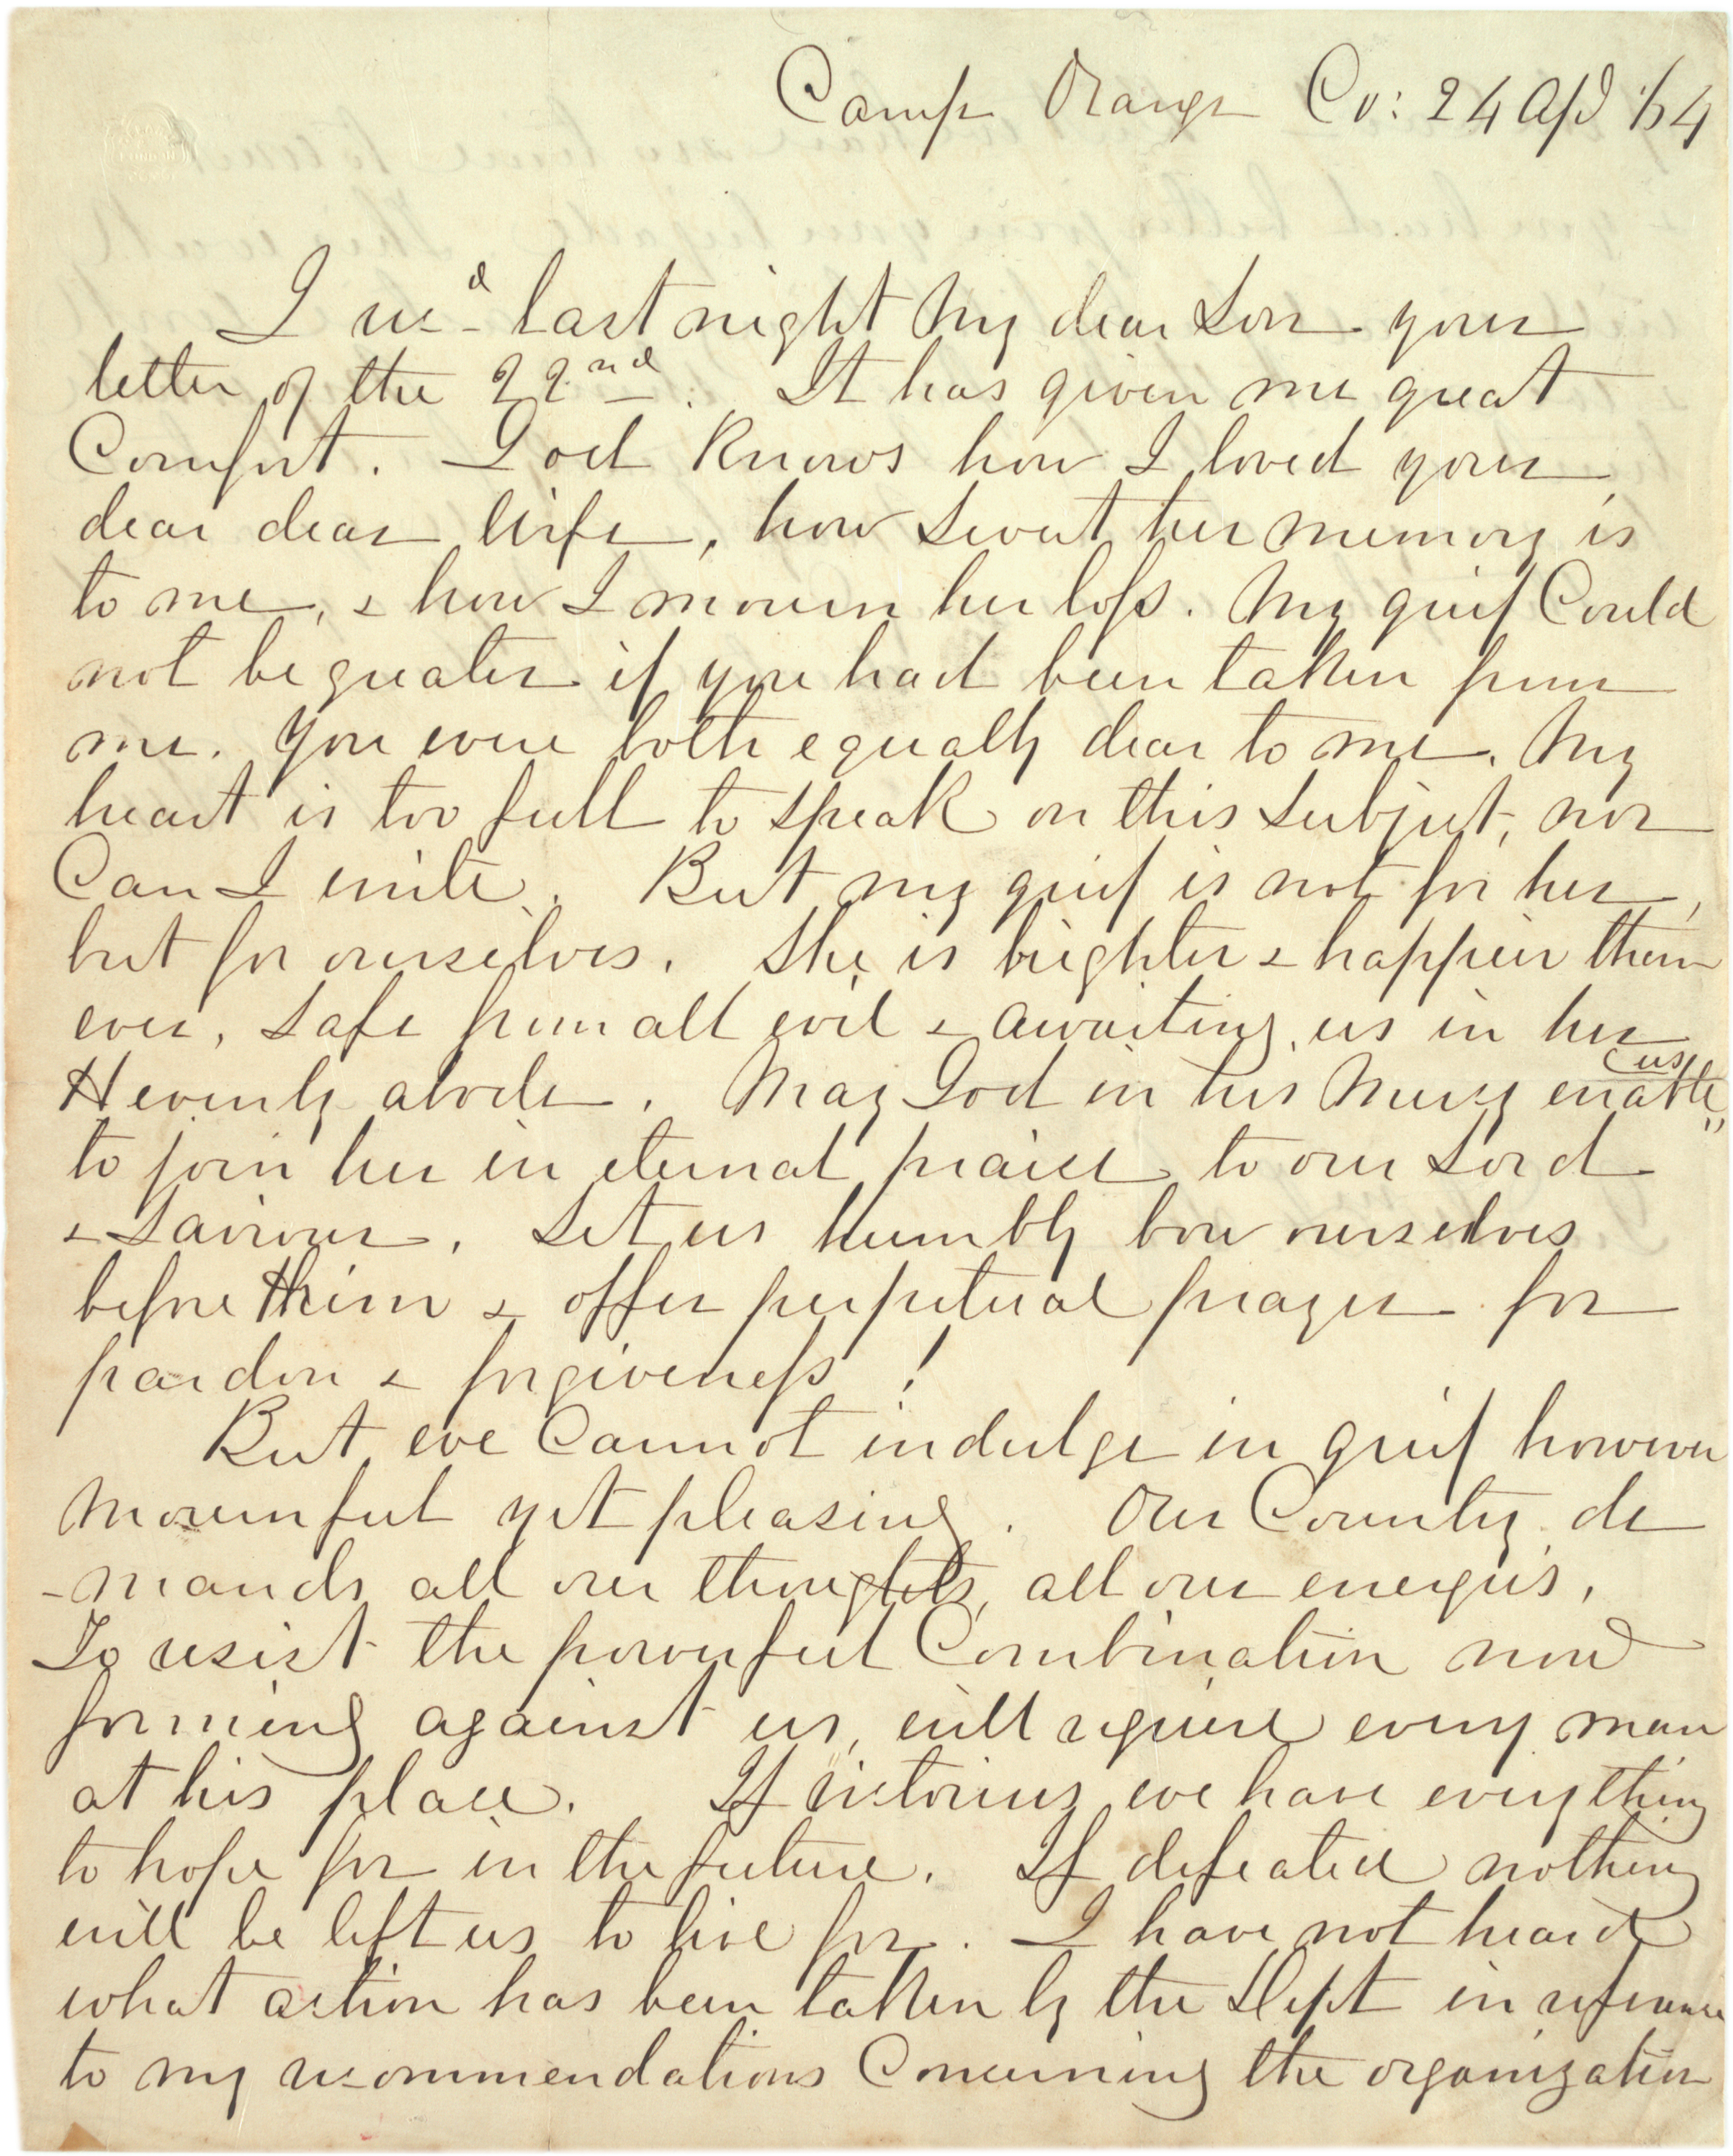 Robert E. Lee's condolence letter to his son Rooney, 1864 | Gilder Lehrman  Institute of American History